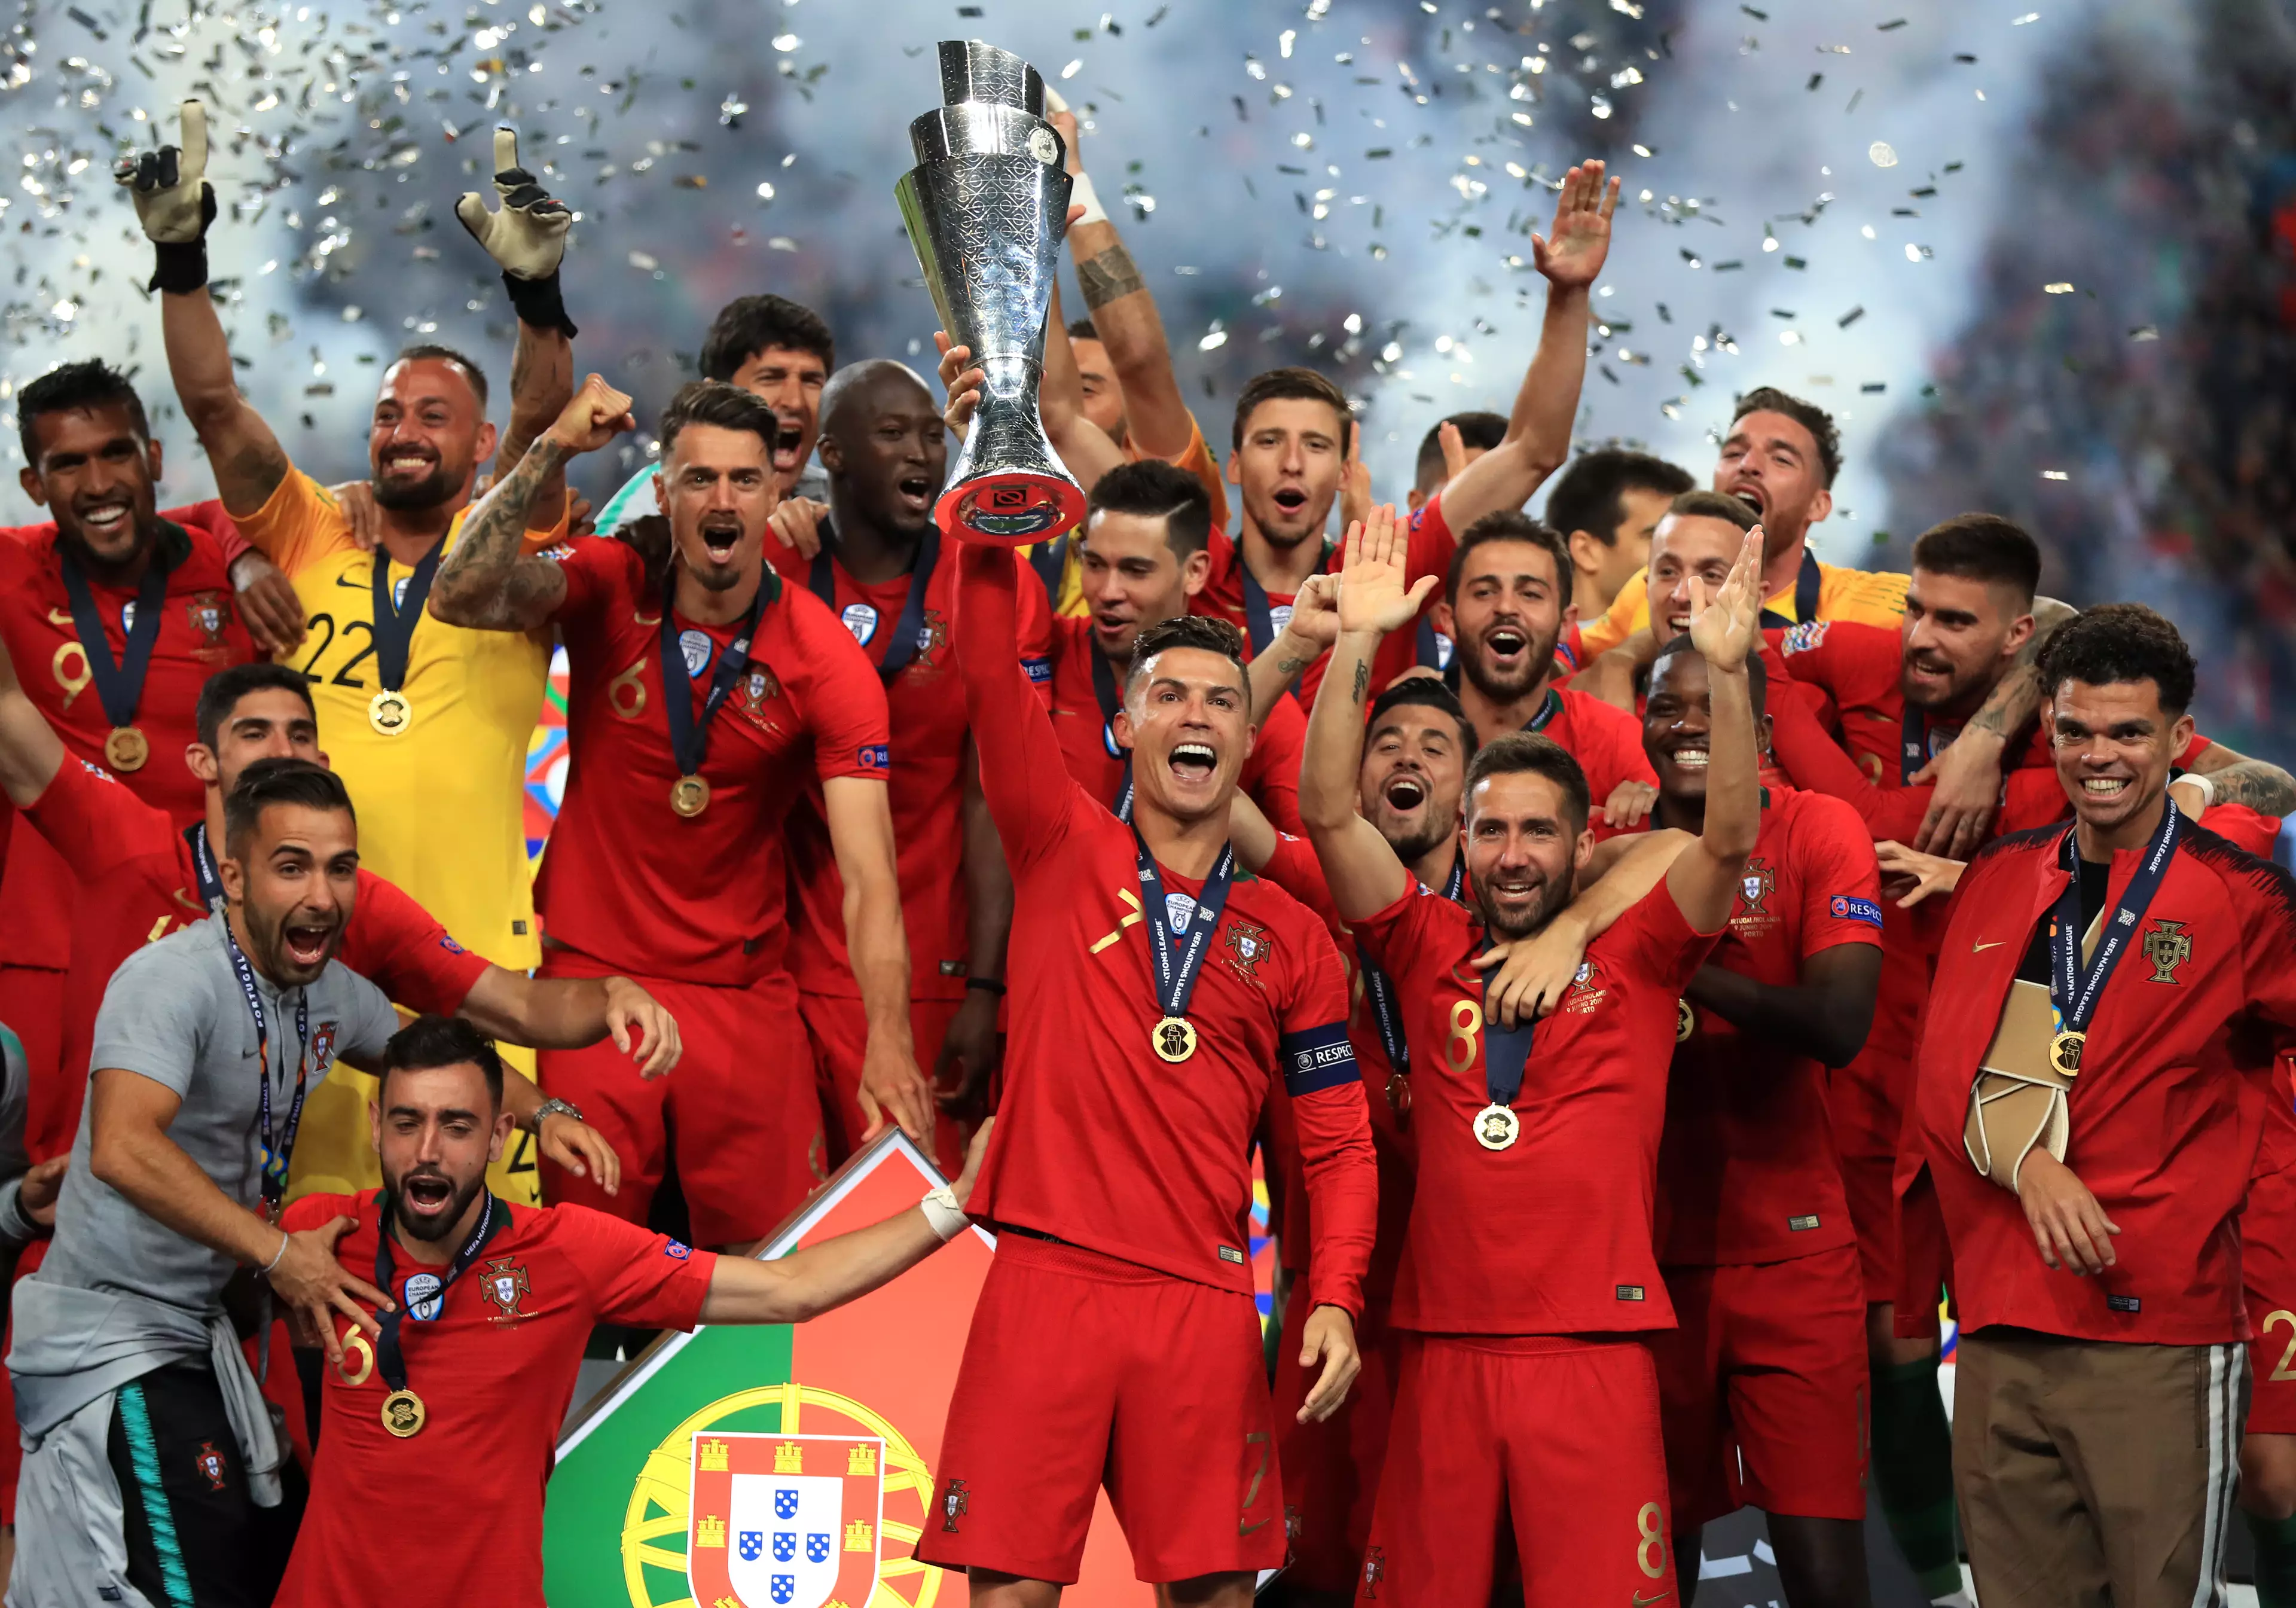 Ronaldo lifts the Nations League trophy. Image: PA Images